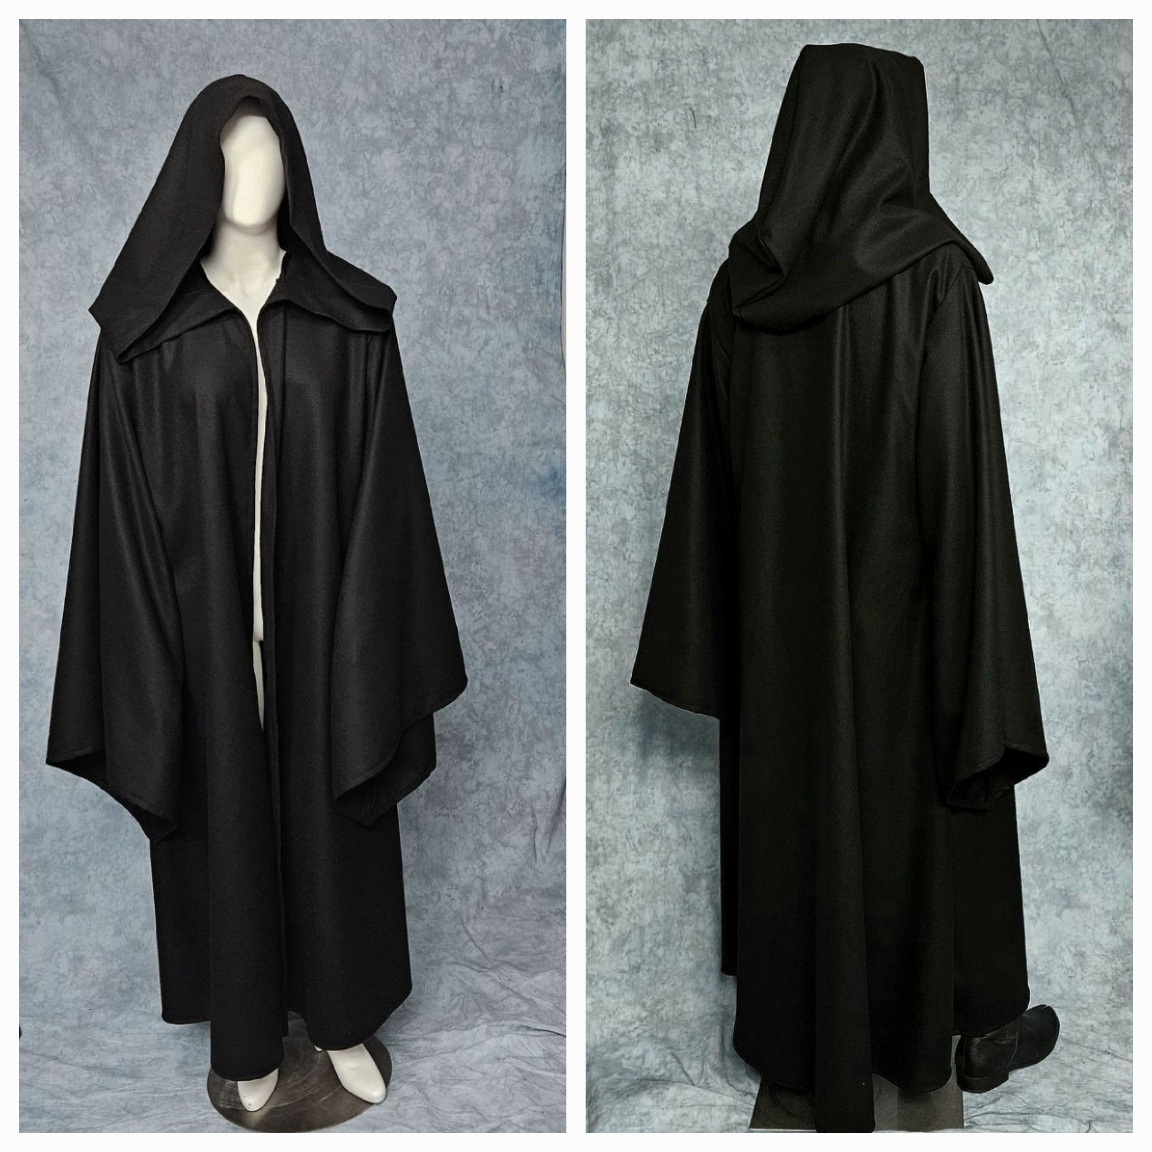 Jedi Robes - Twin Roses Designs